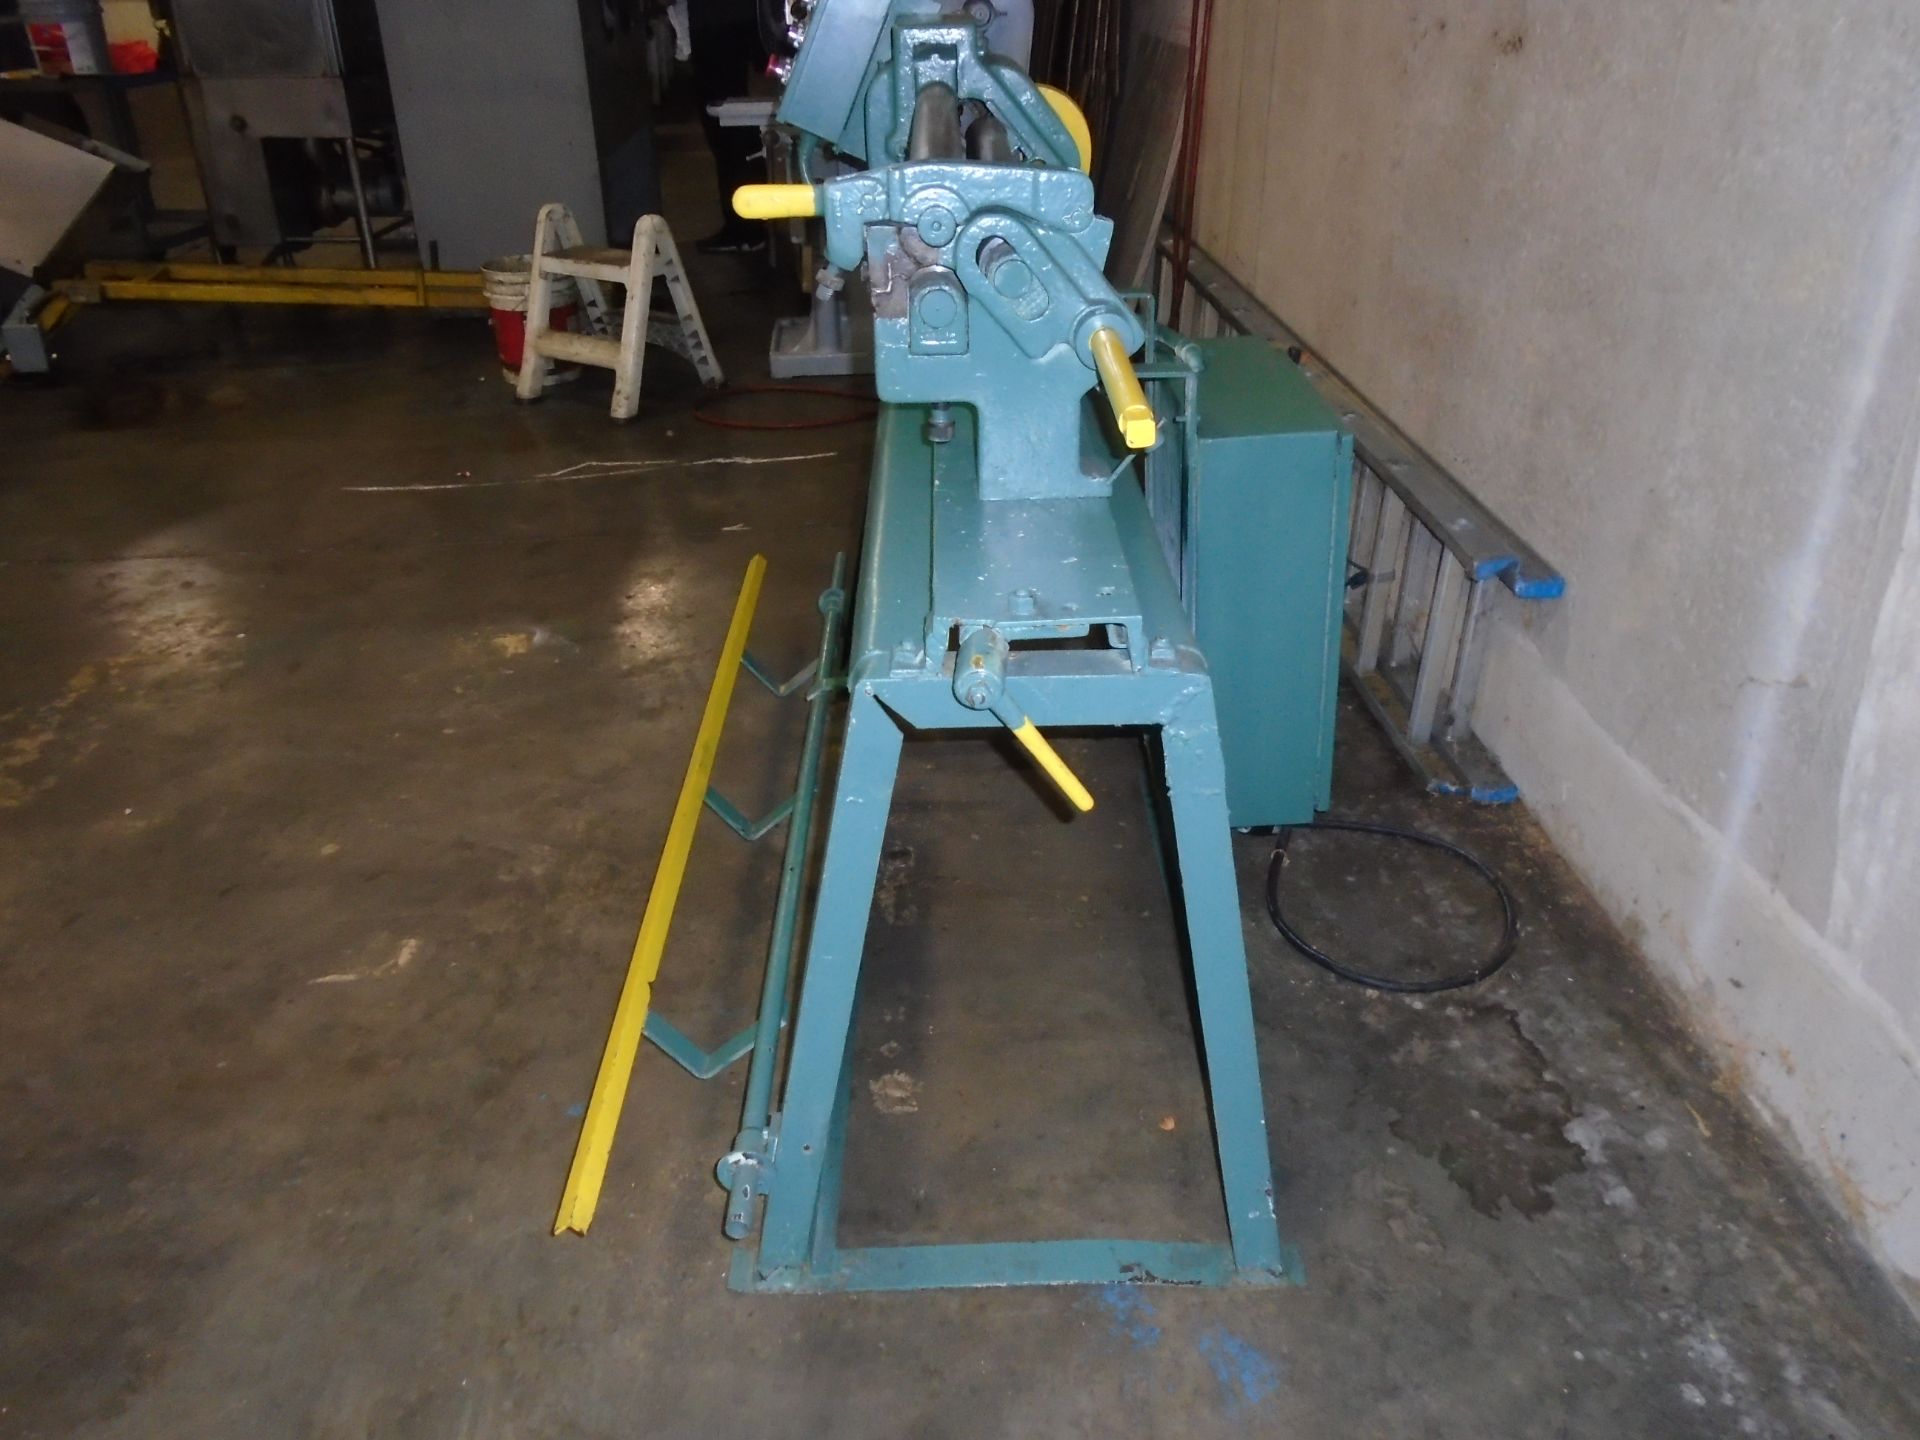 Peck Stow & Wilcox Co Power Roll Forming Machine 20 Gage Capacity 3” x 36” Model 392-E SN: 6/53 - Image 2 of 10